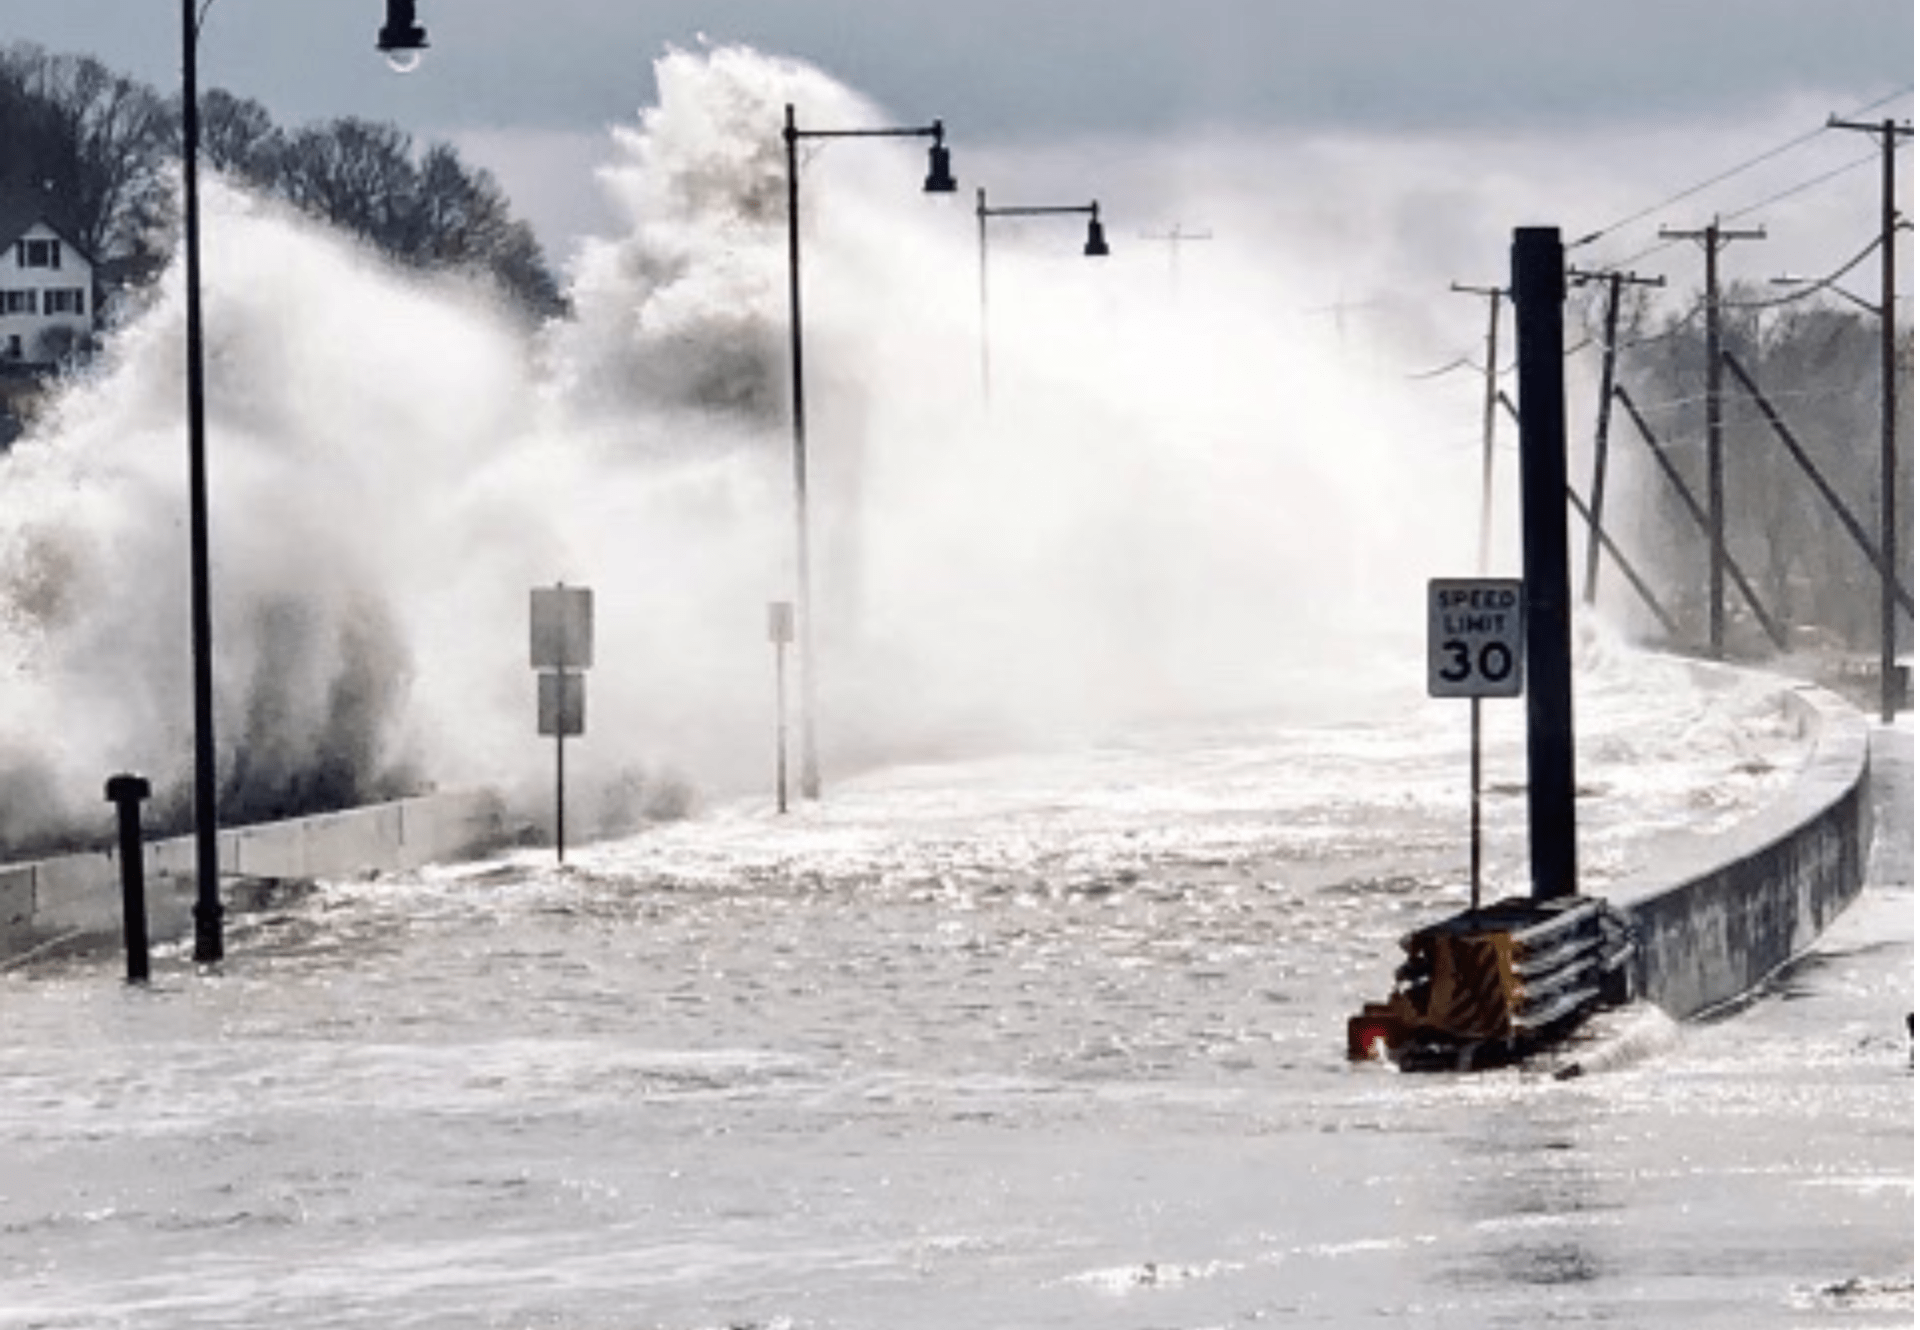 Waves crash over the Winthrop Parkway seawall during a storm in March 2018. (Courtesy of Sandra Castellarin)